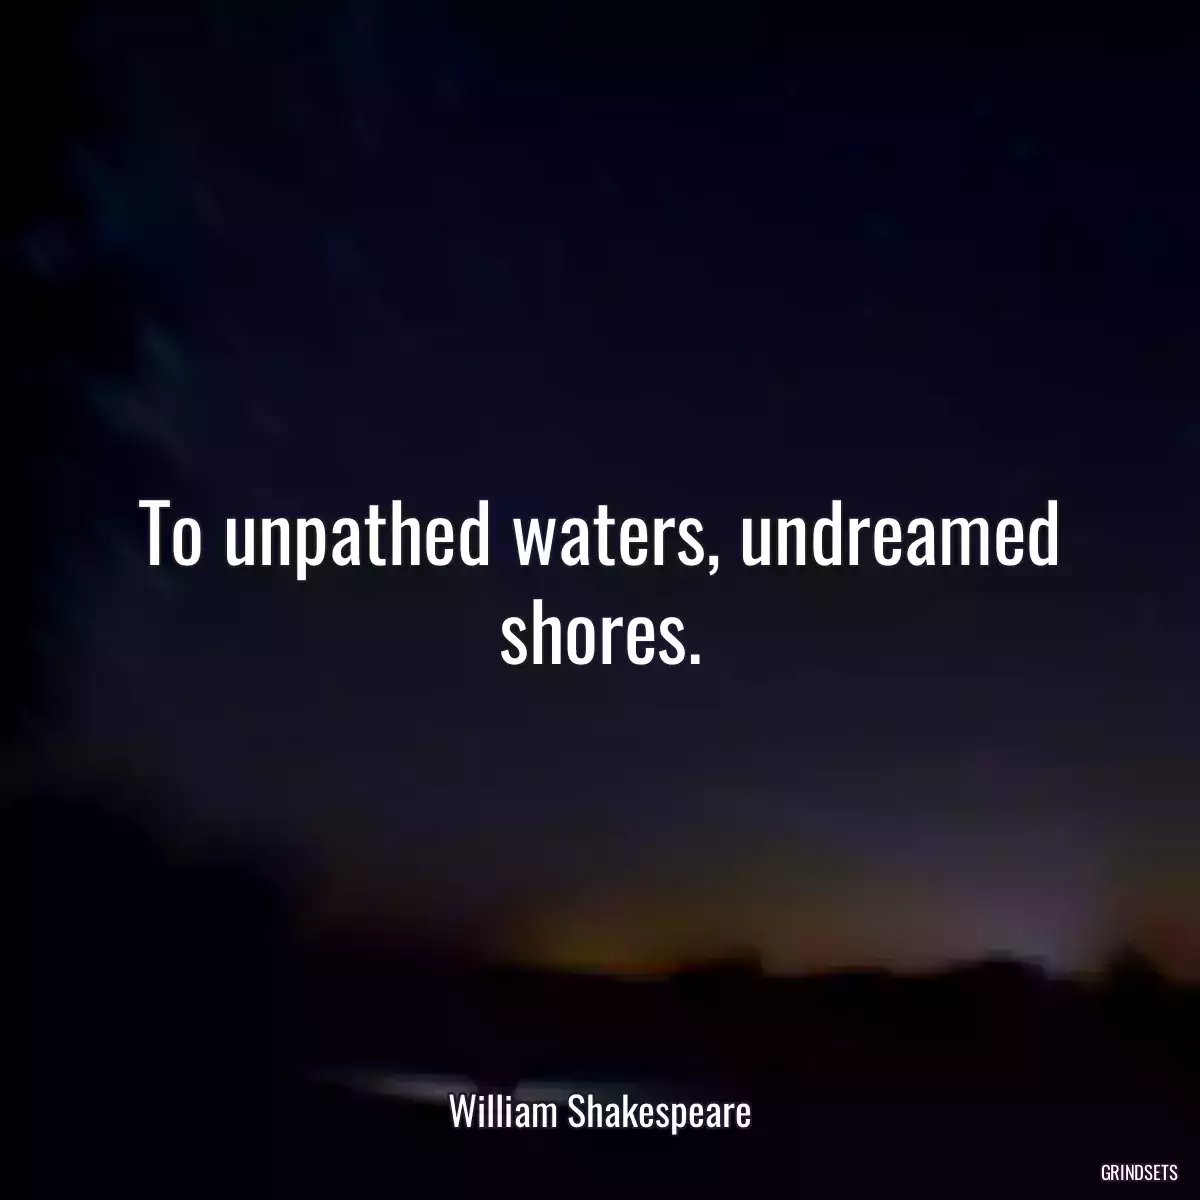 To unpathed waters, undreamed shores.